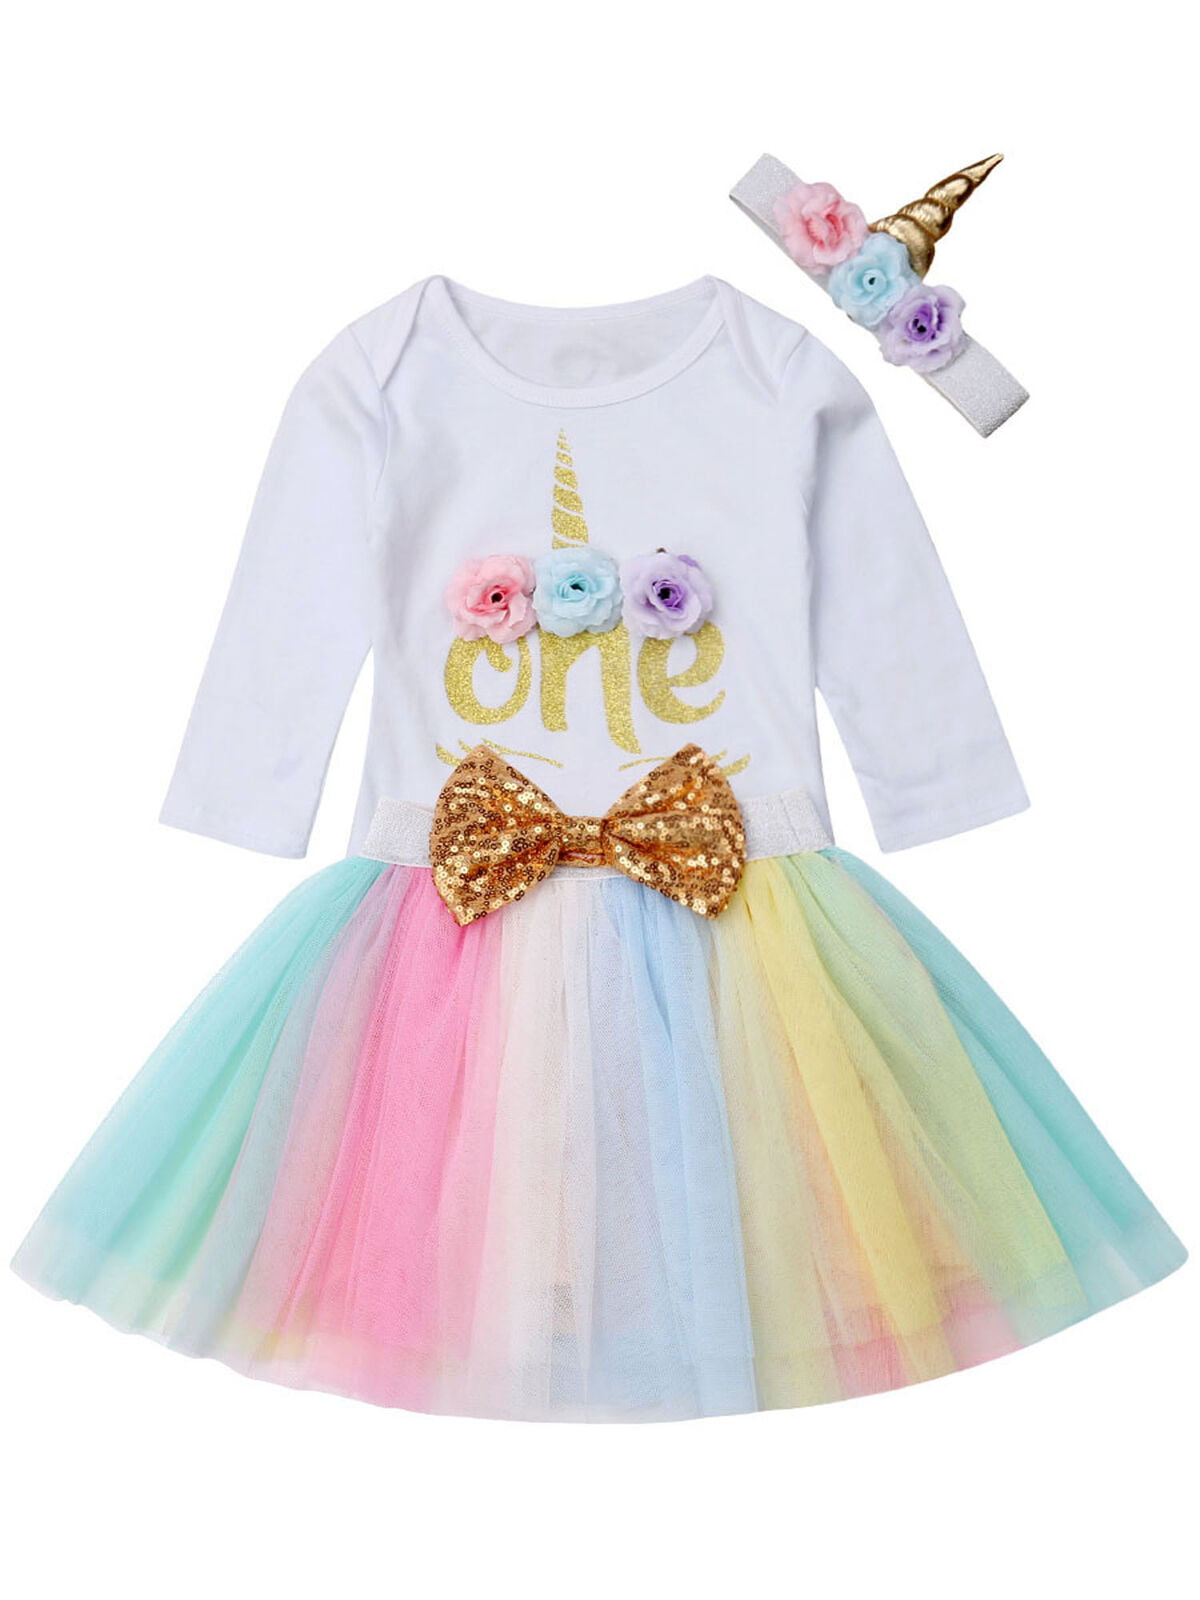 3pcs Infant Girls Romper Tutu Dress Headband Outfit 1st Birthday Party Clothes 